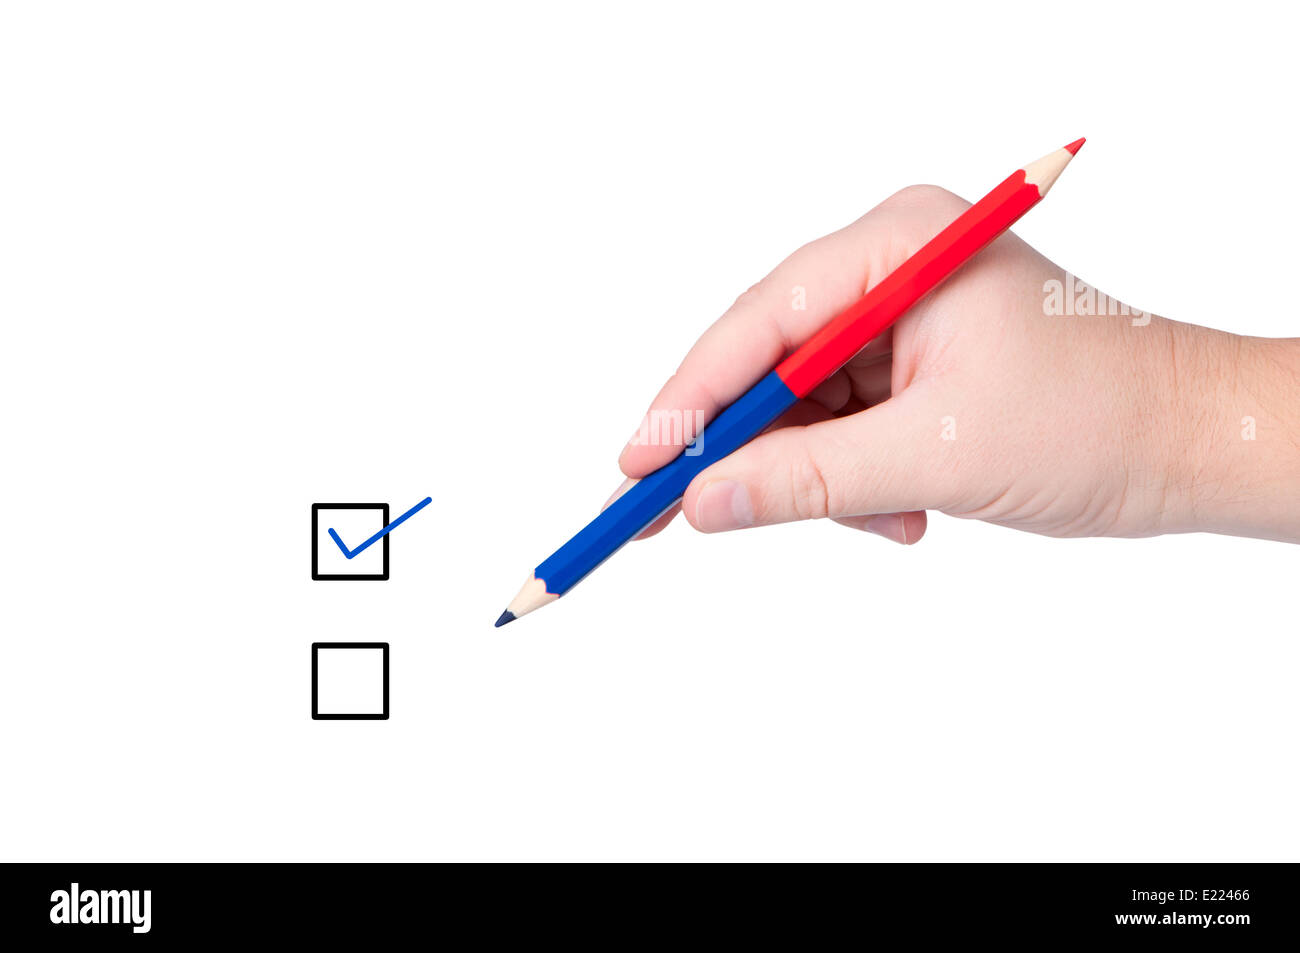 Hand with pencil makes mark. Stock Photo